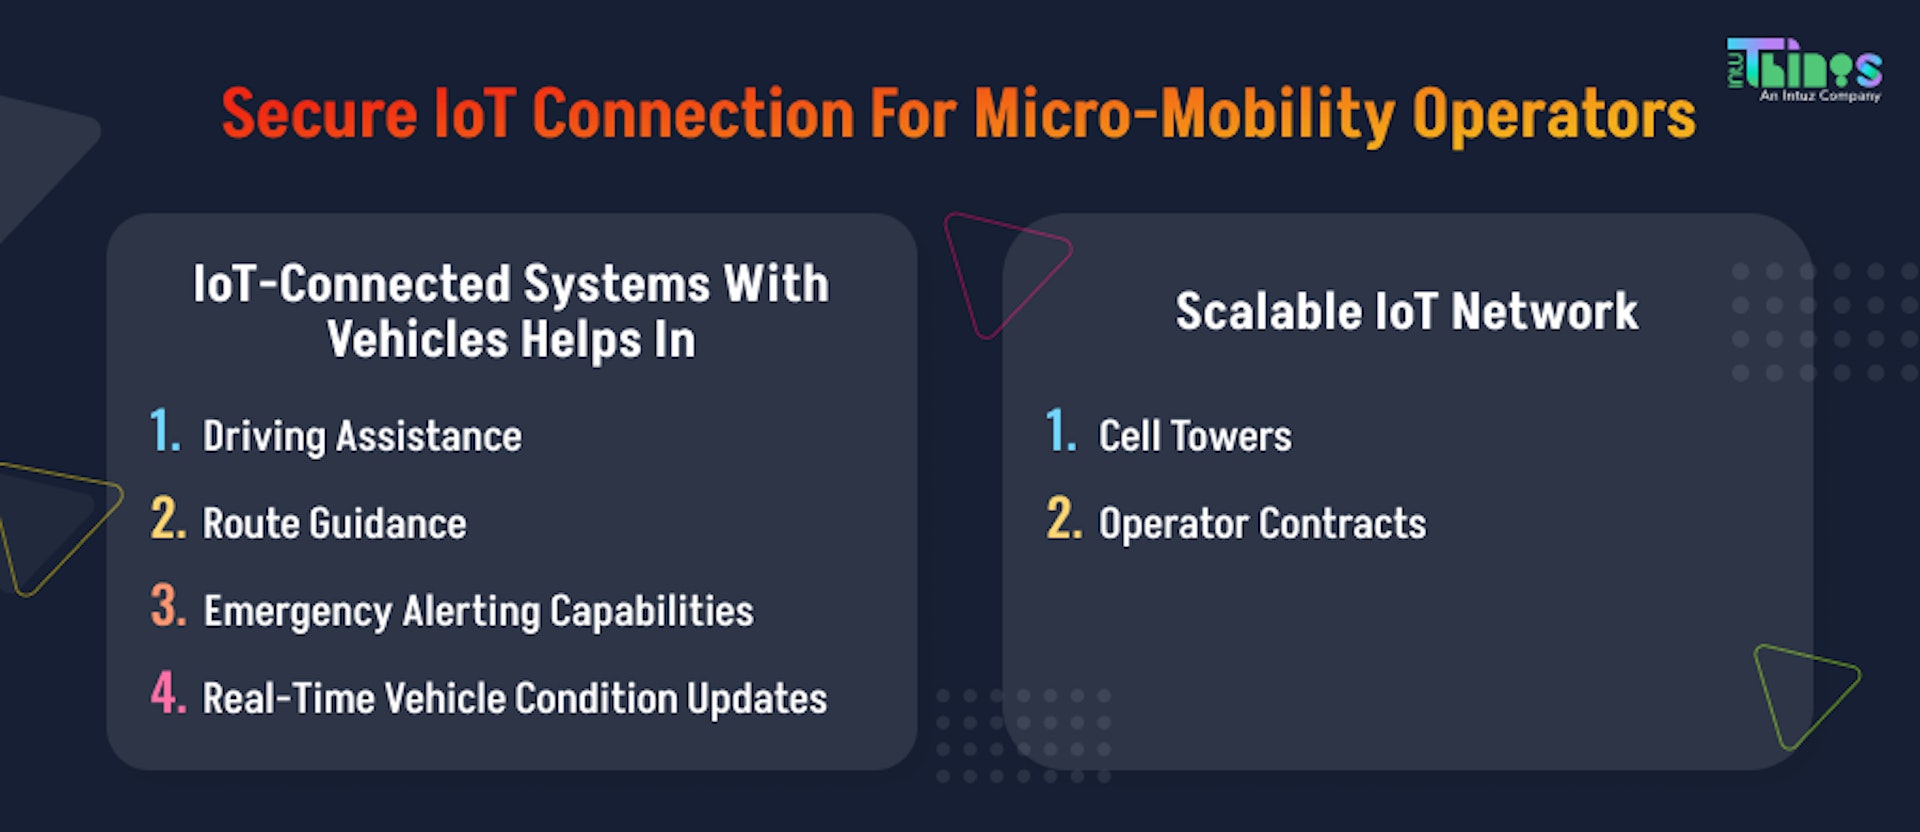 Secure IoT connection for micro-mobility operators